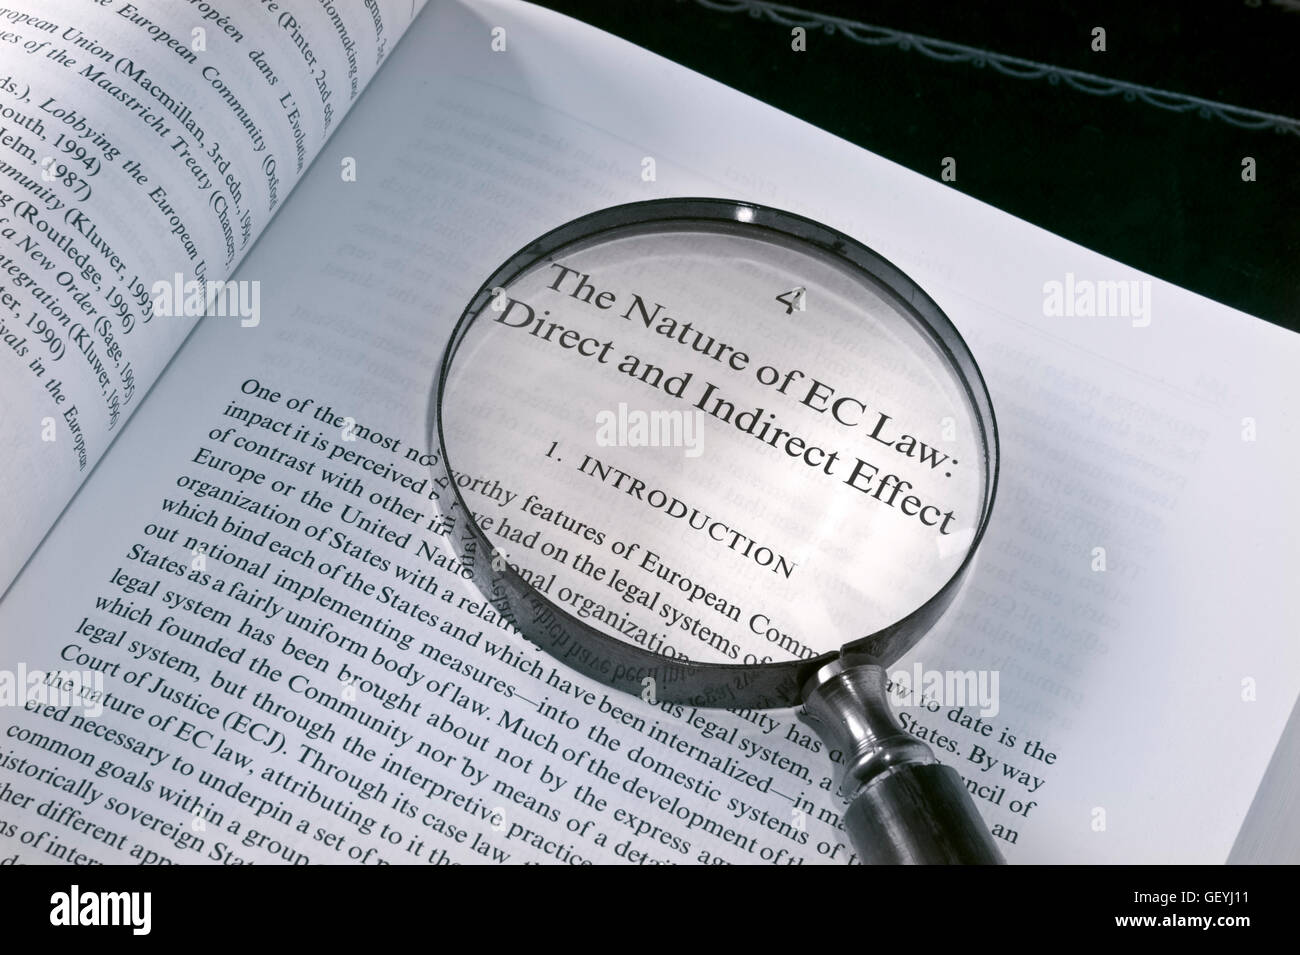 BREXIT Concept image of open EU reference Law book on desk with magnifying glass highlighting EC Law effects Stock Photo